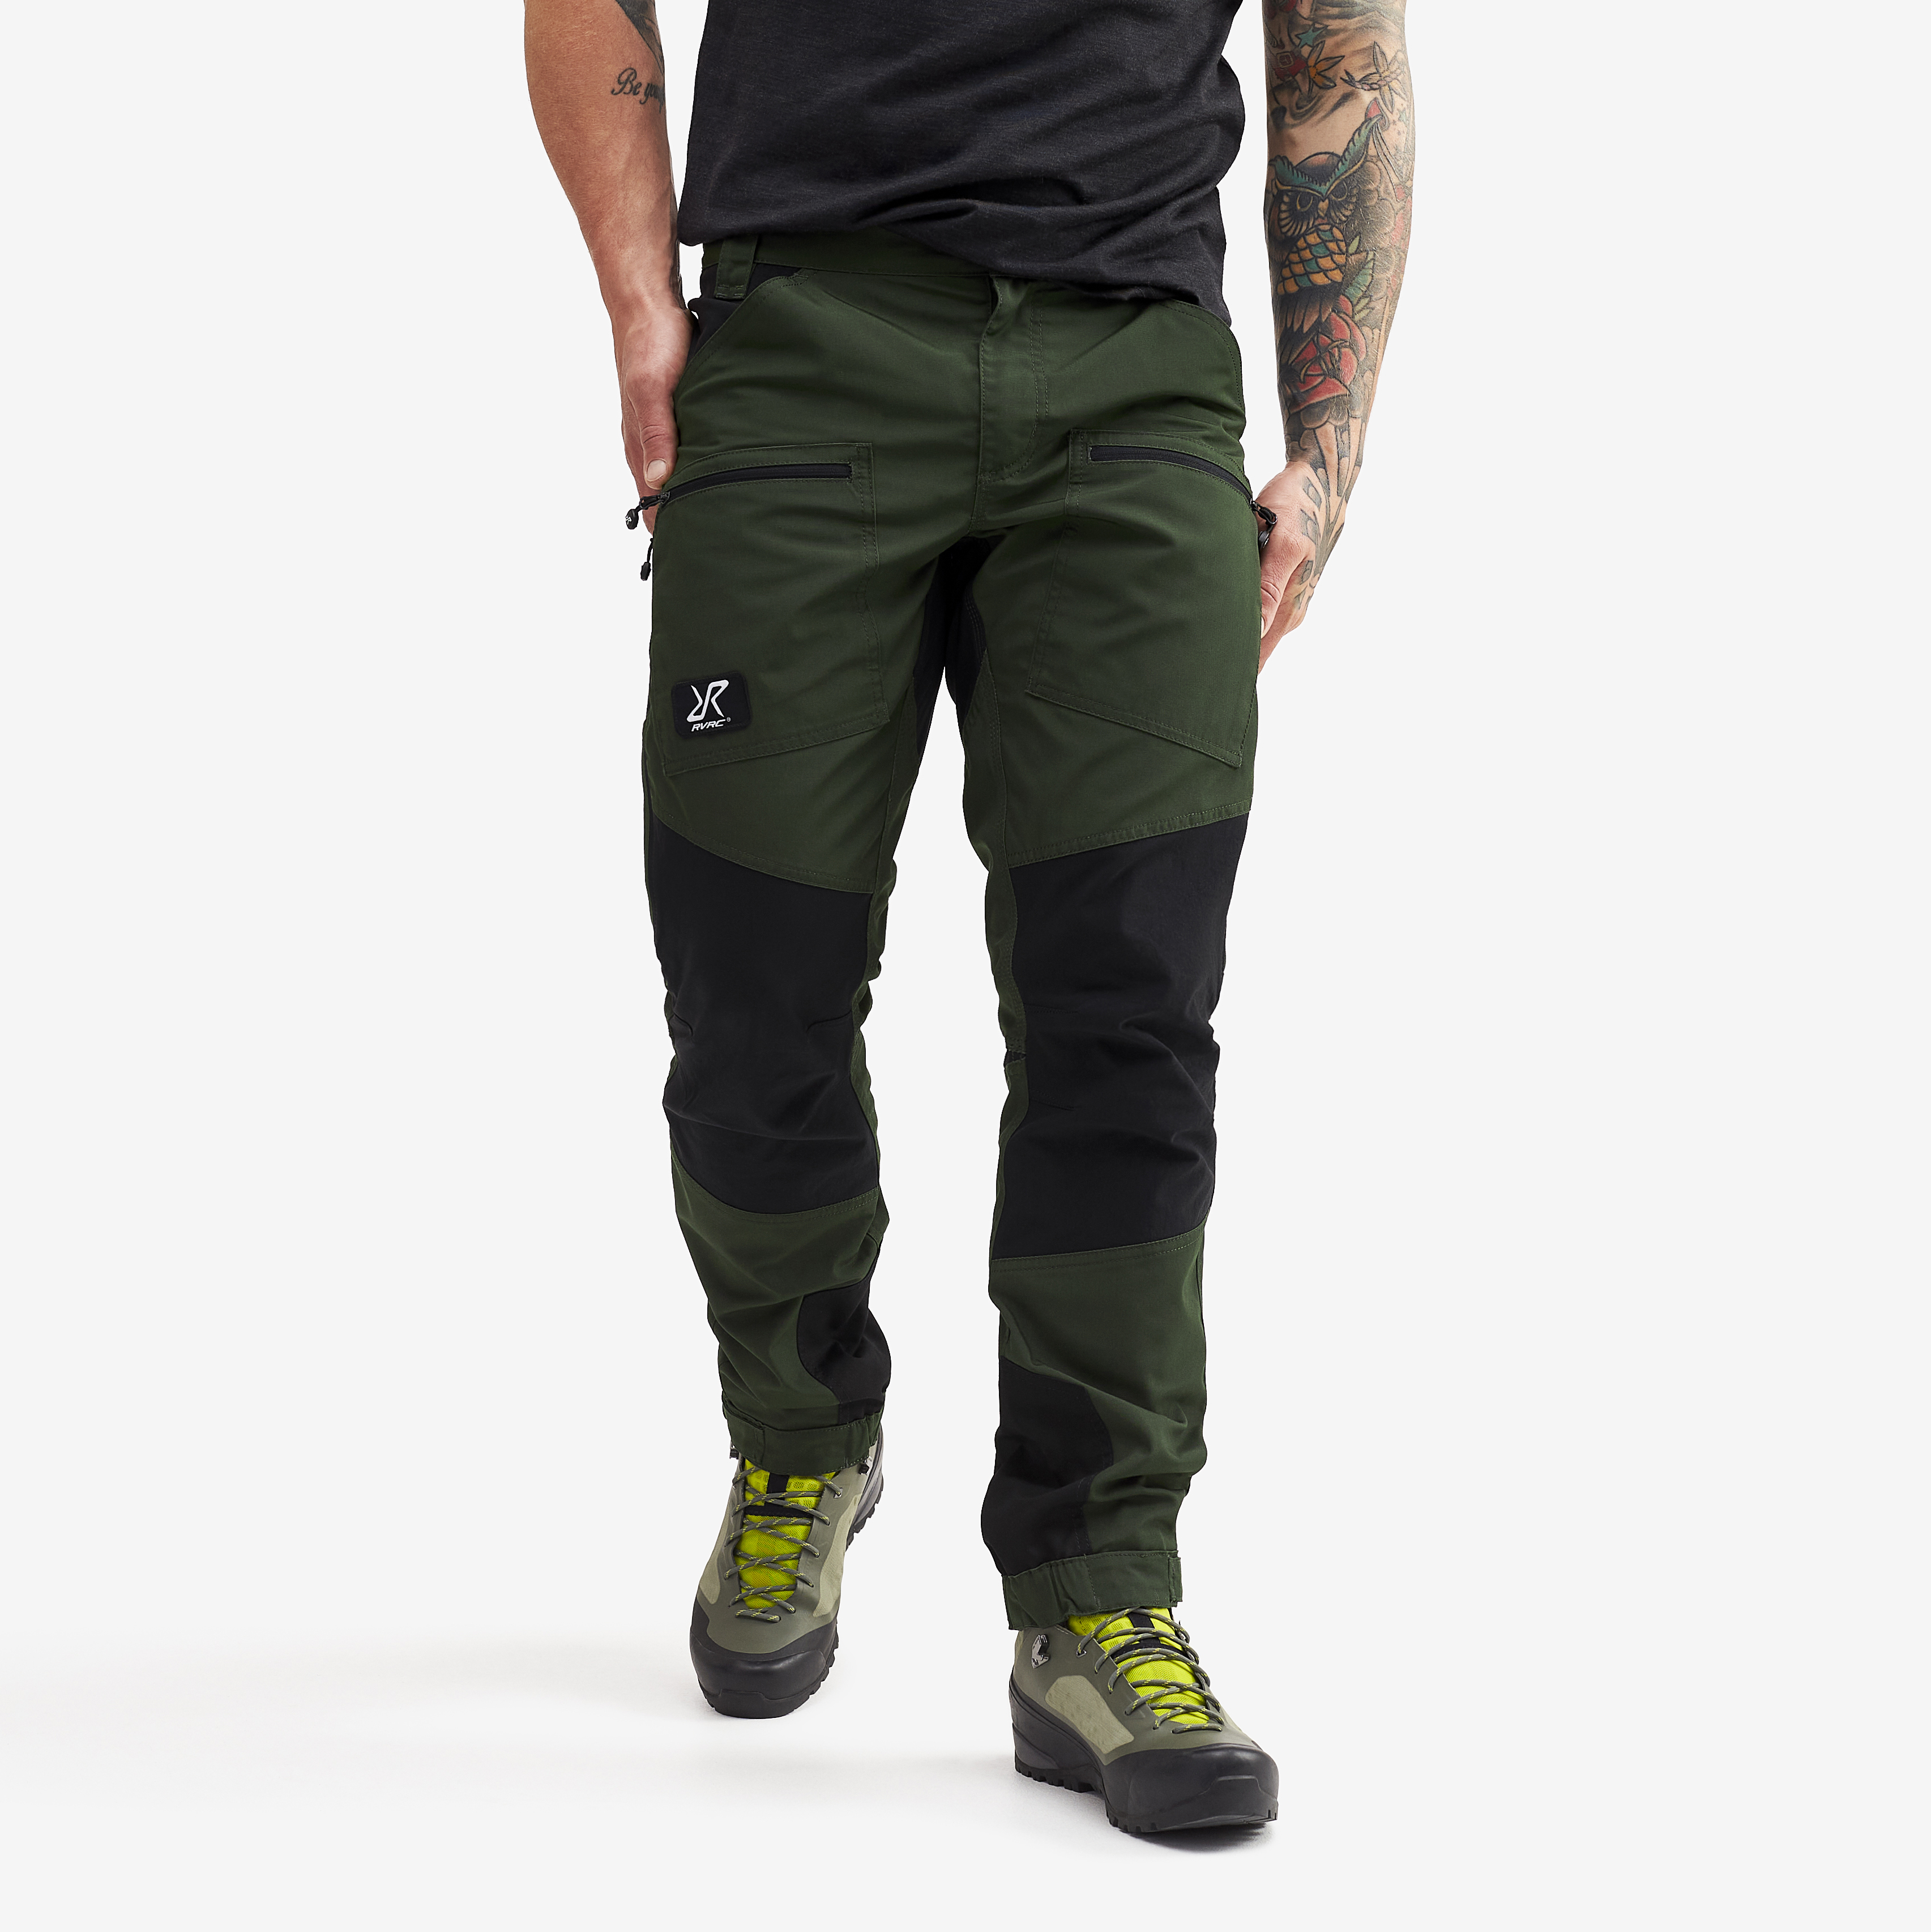 Nordwand Pro Short Pants Forest Green